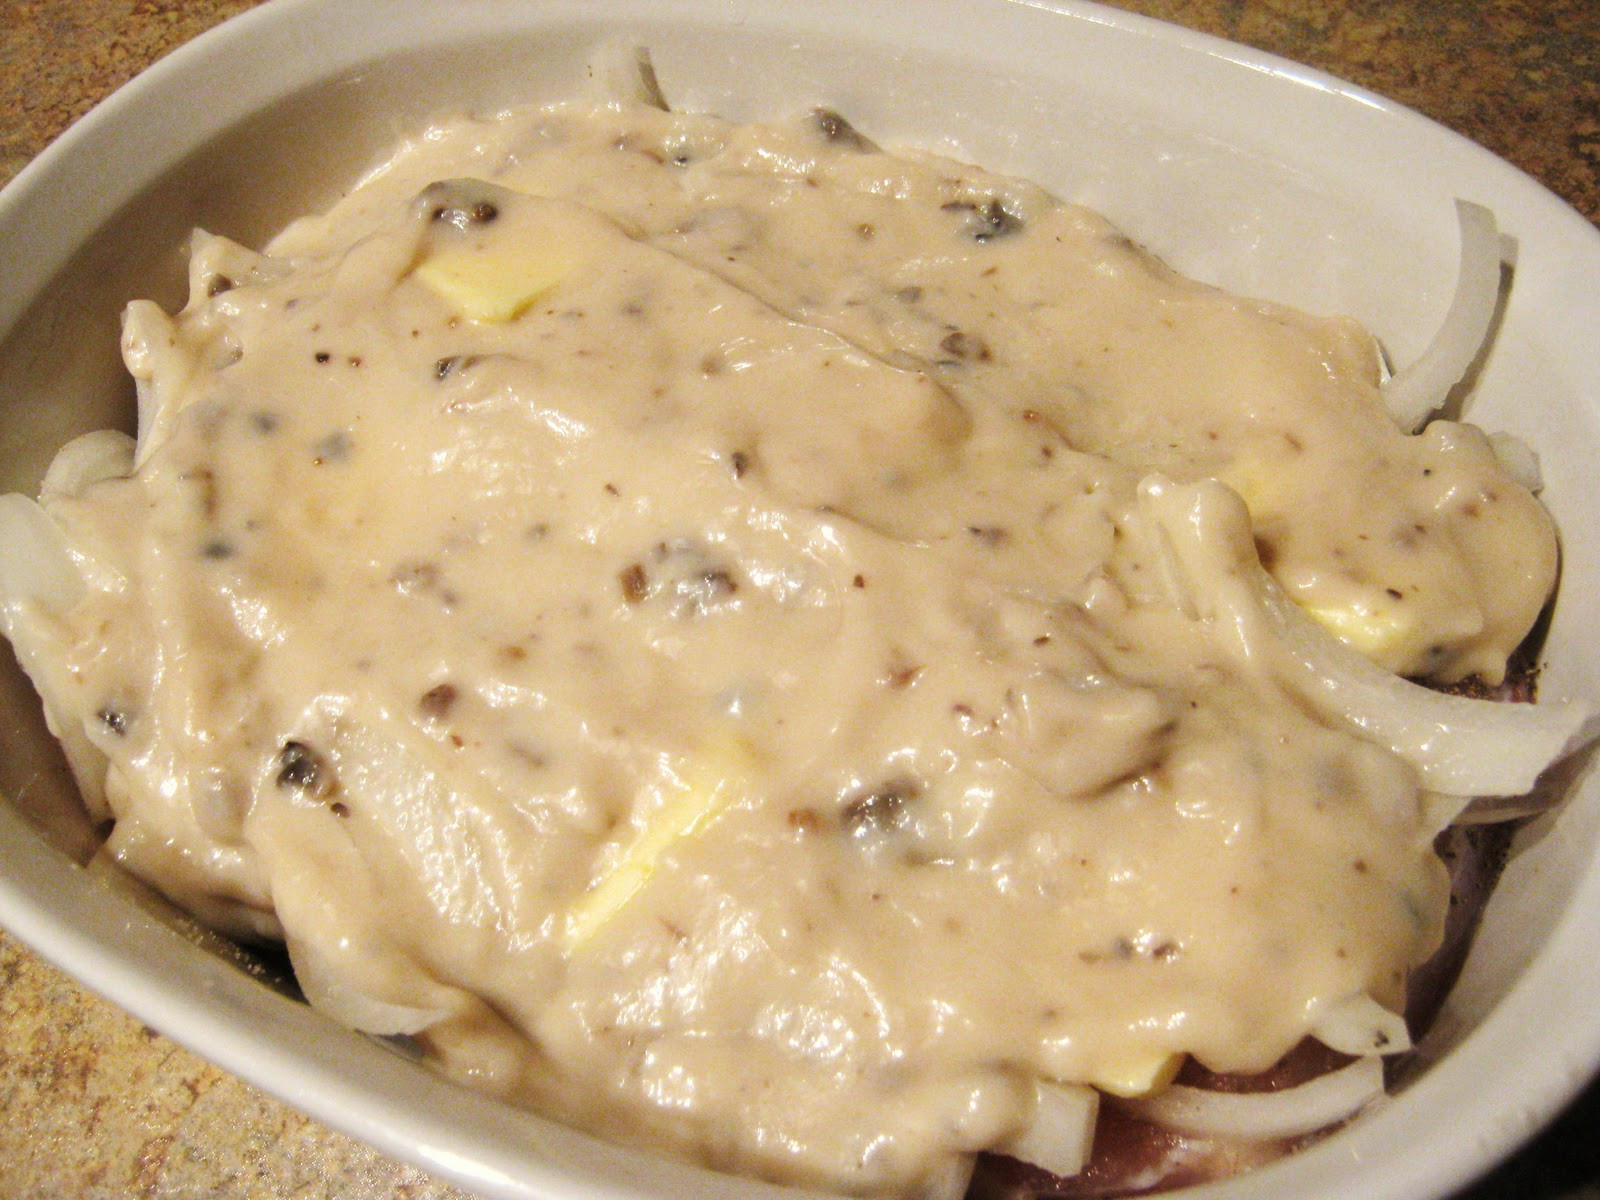 Baking Chicken Breast with Cream Of Mushroom soup New Dwelling &amp; Telling Baked Cream Of Mushroom Chicken